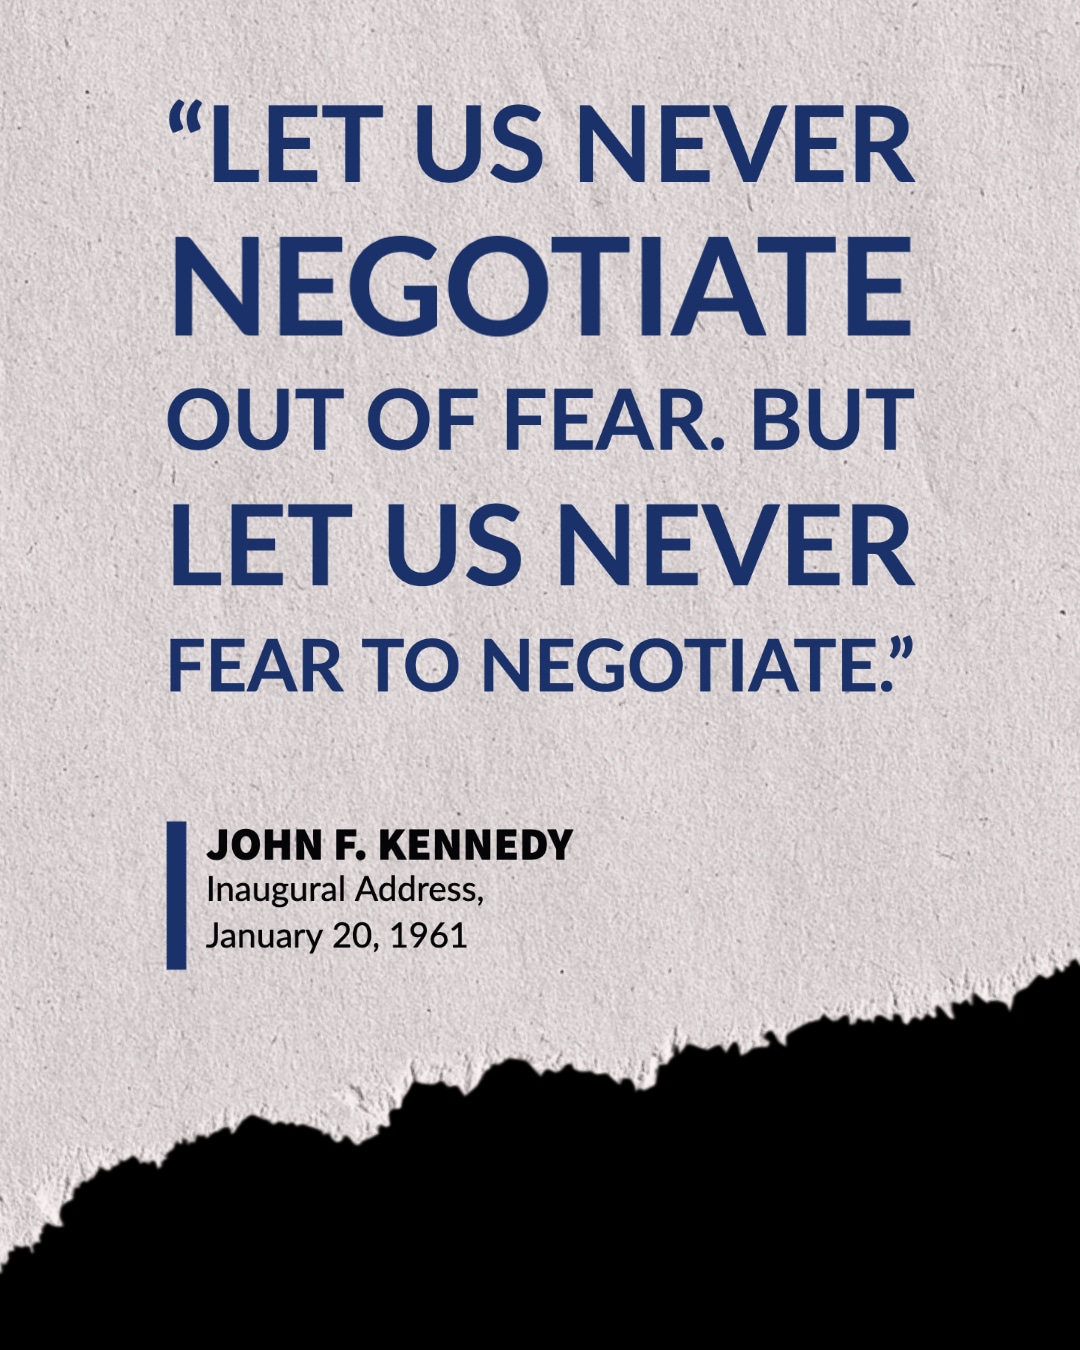 Let us never negotiate out of fear. But let us never fear to negotiate. John F. Kennedy